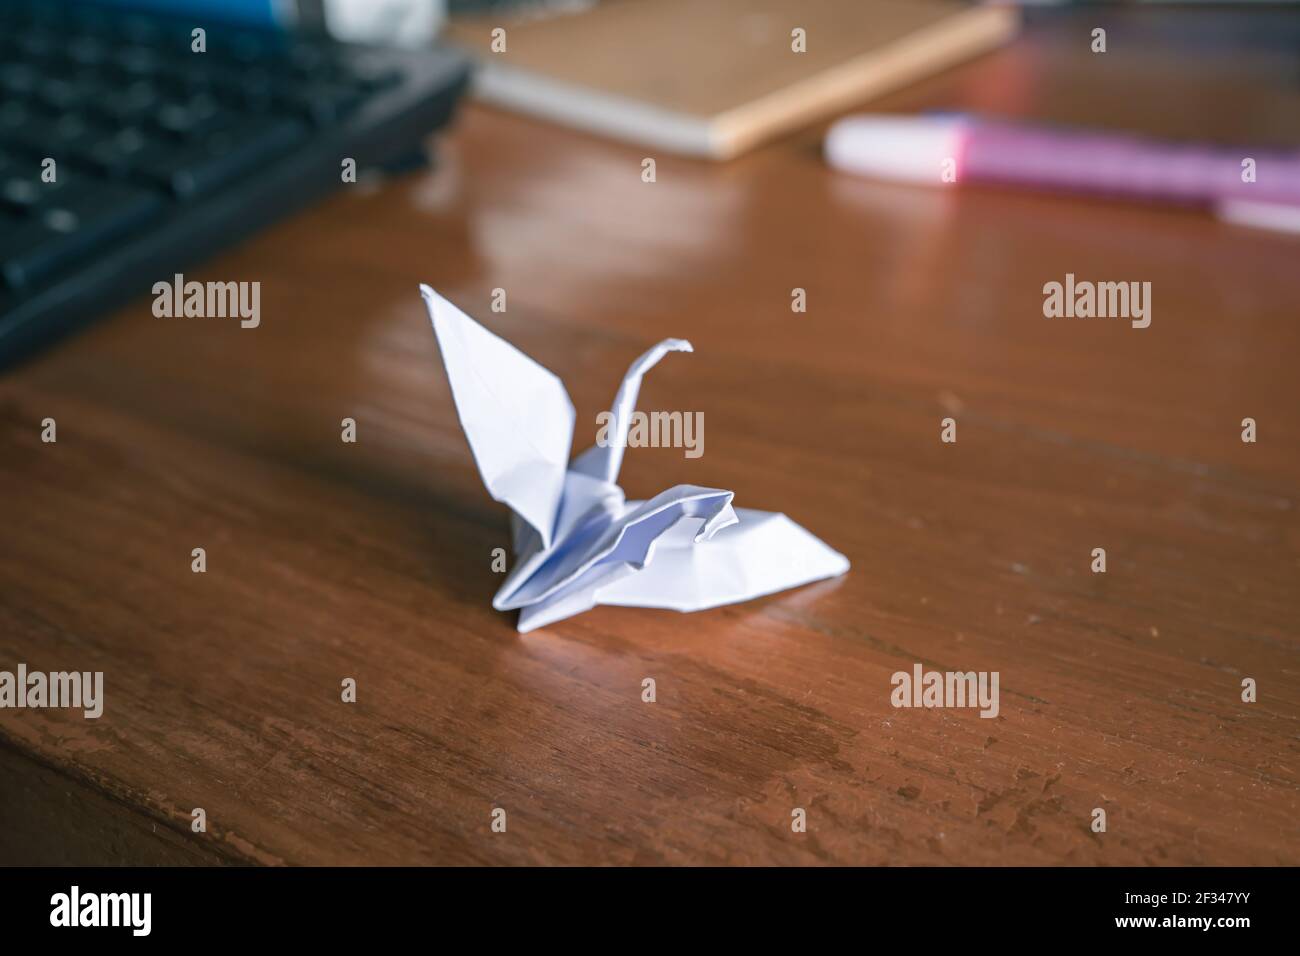 Mental illness concept. Damaged origami paper crane on wooden table. Stock Photo